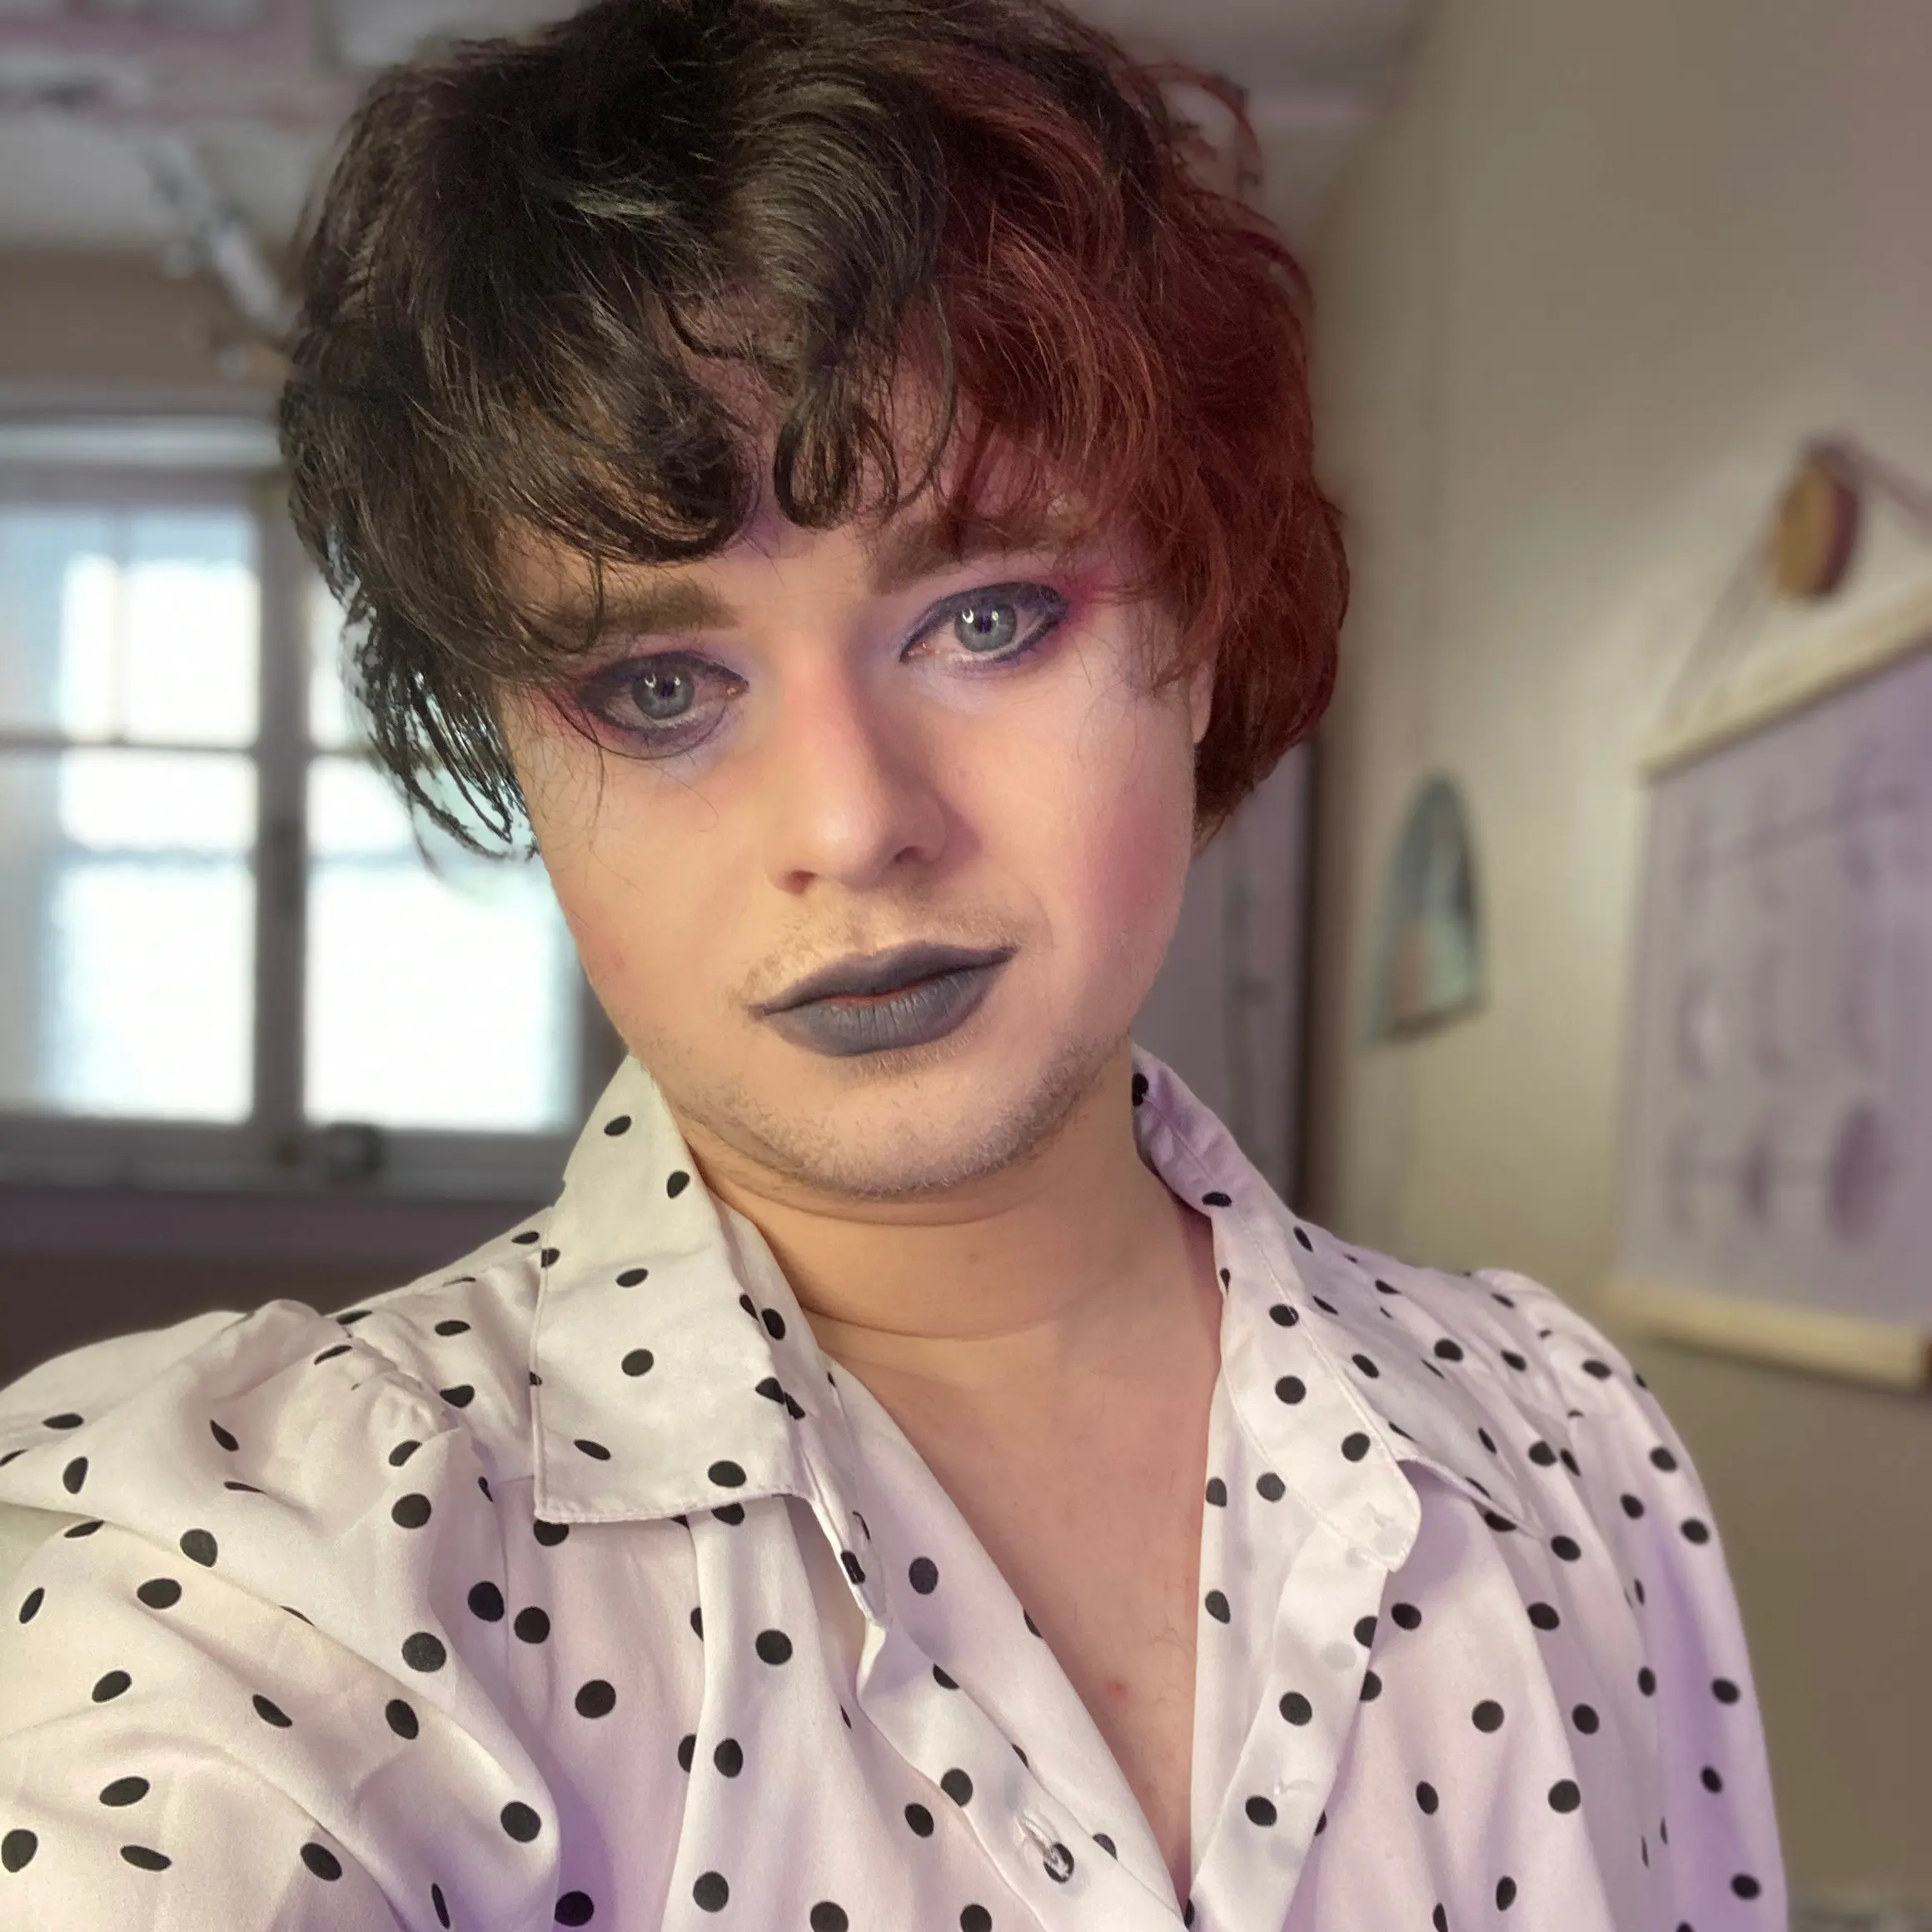 Pictured is a photograph of a white person with medium length, two-toned hair, blue eyes, lightly smiling with cool toned lipstick, wearing a white shirt with black polka dots.]  